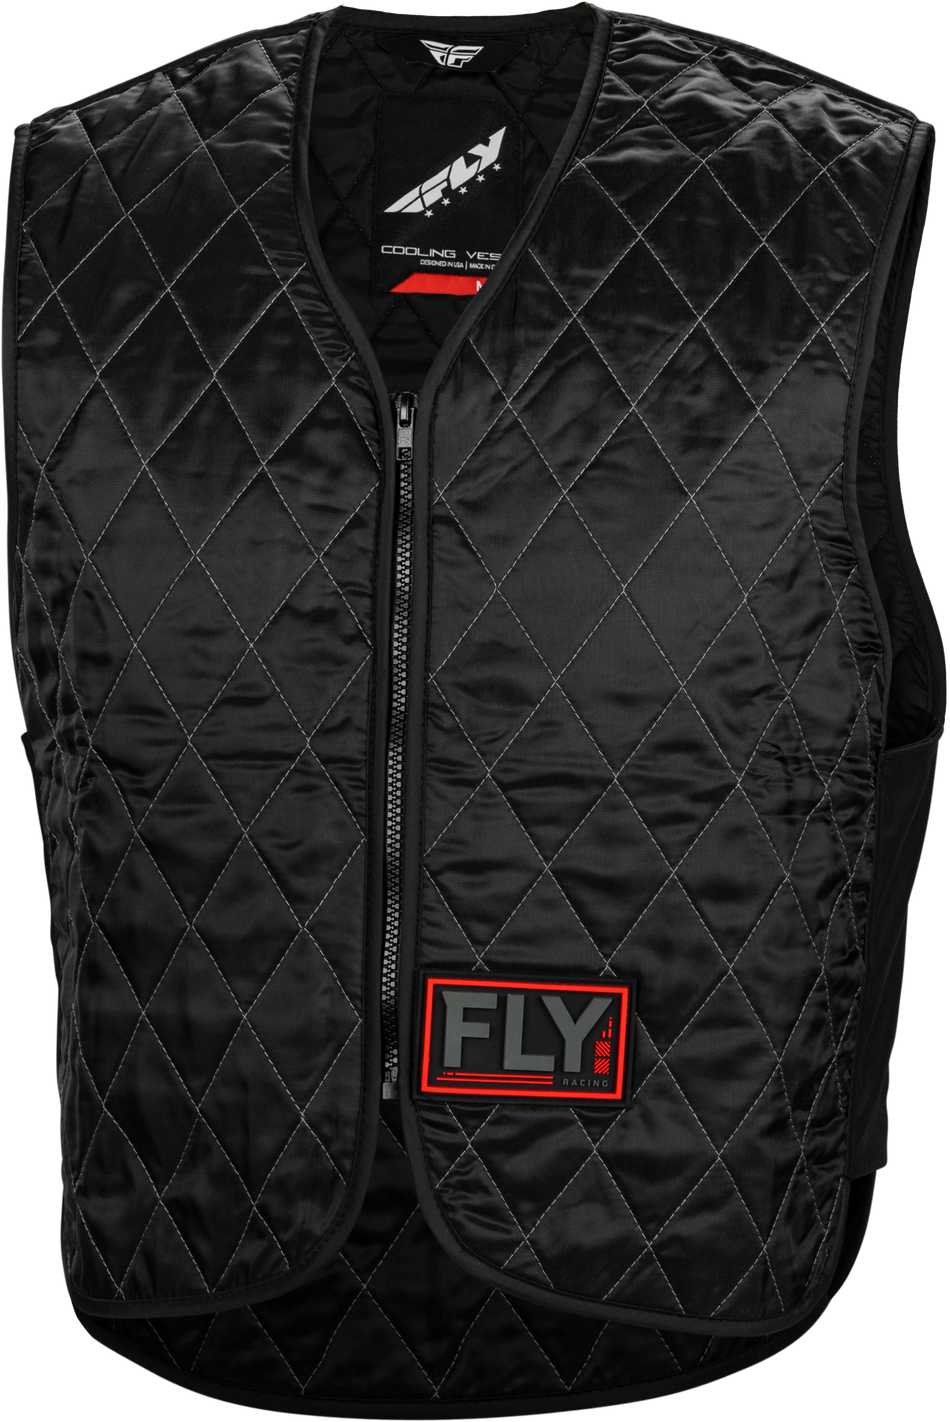 FLY RACING Cooling Vest Black Xl 476-6026X